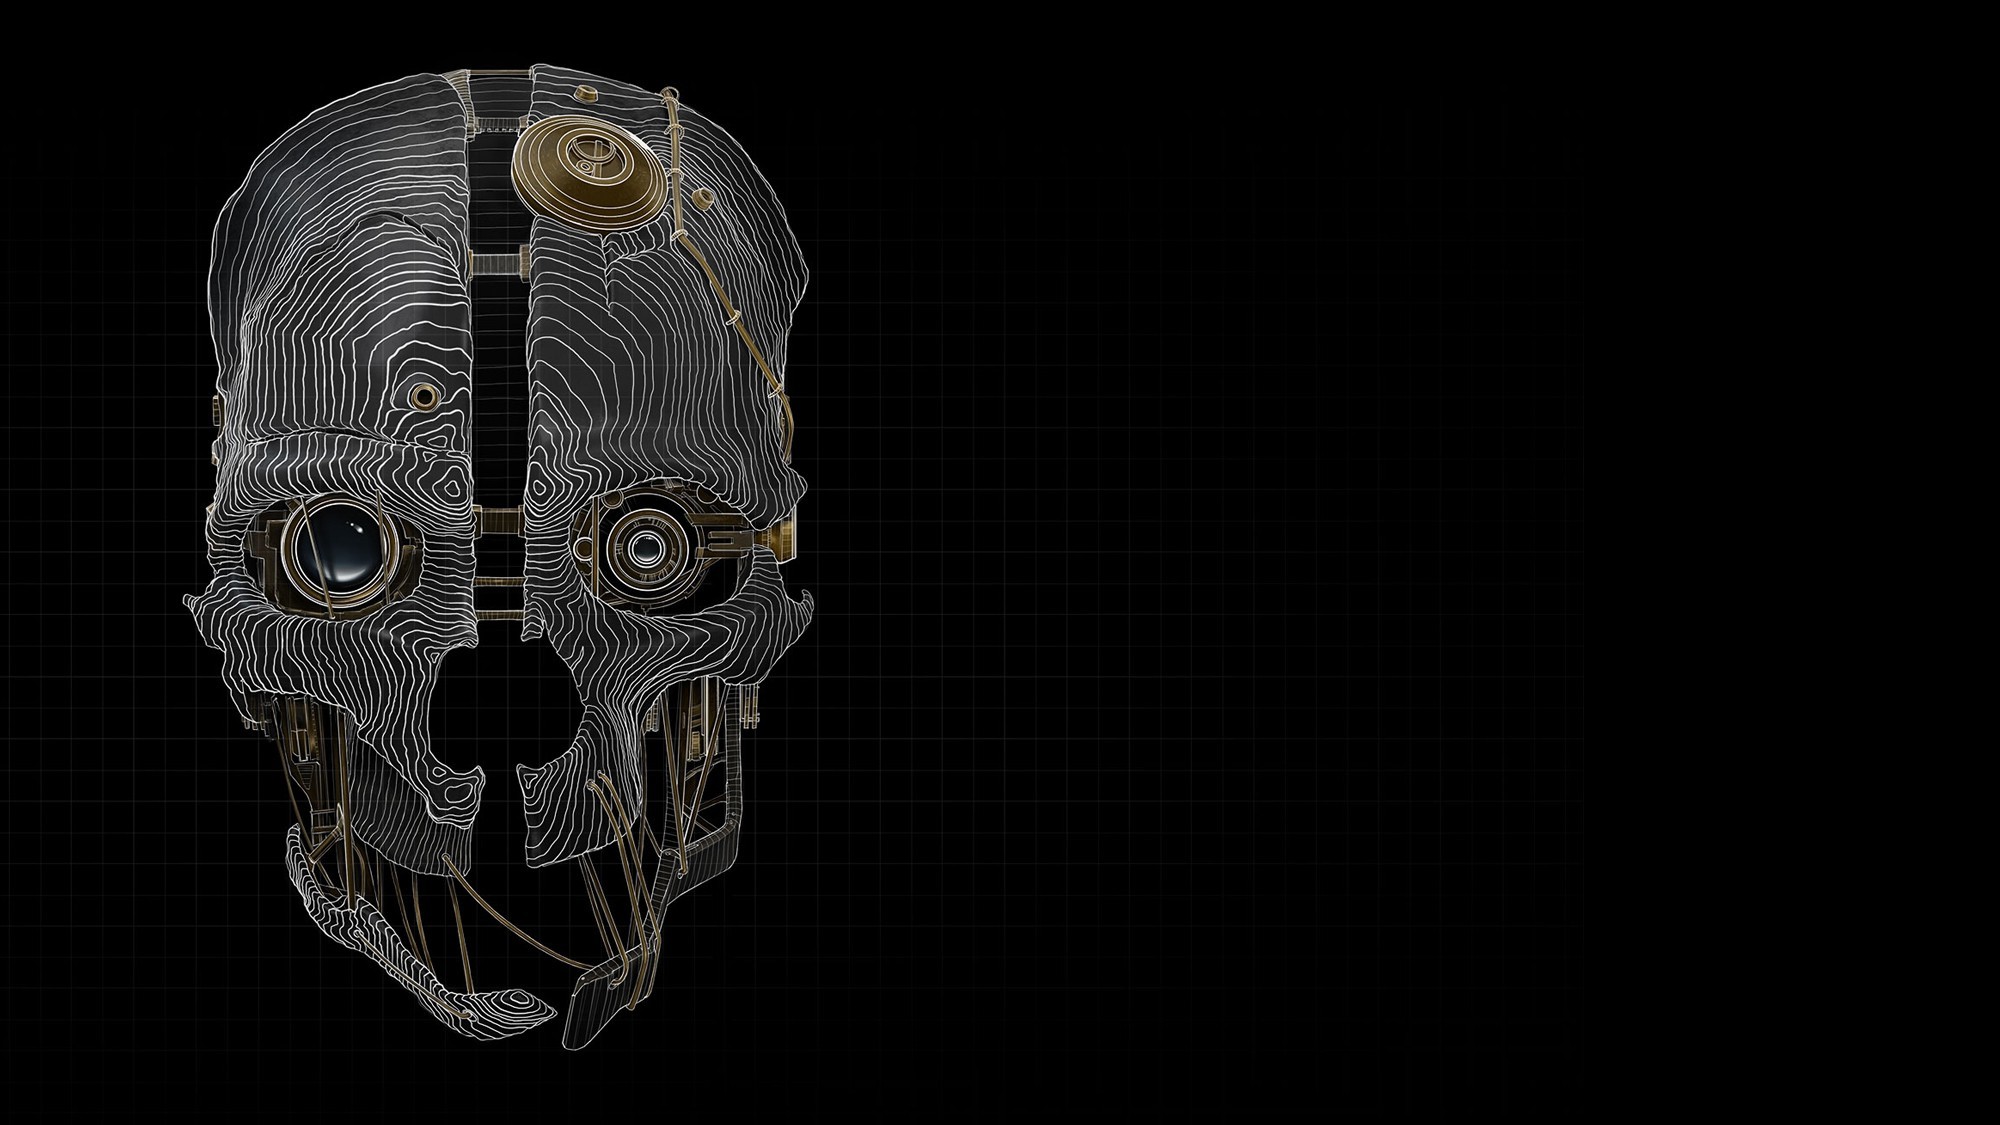 Dishonored, Video Games, Bethesda Softworks, Skull, Mask, Steampunk Wallpaper